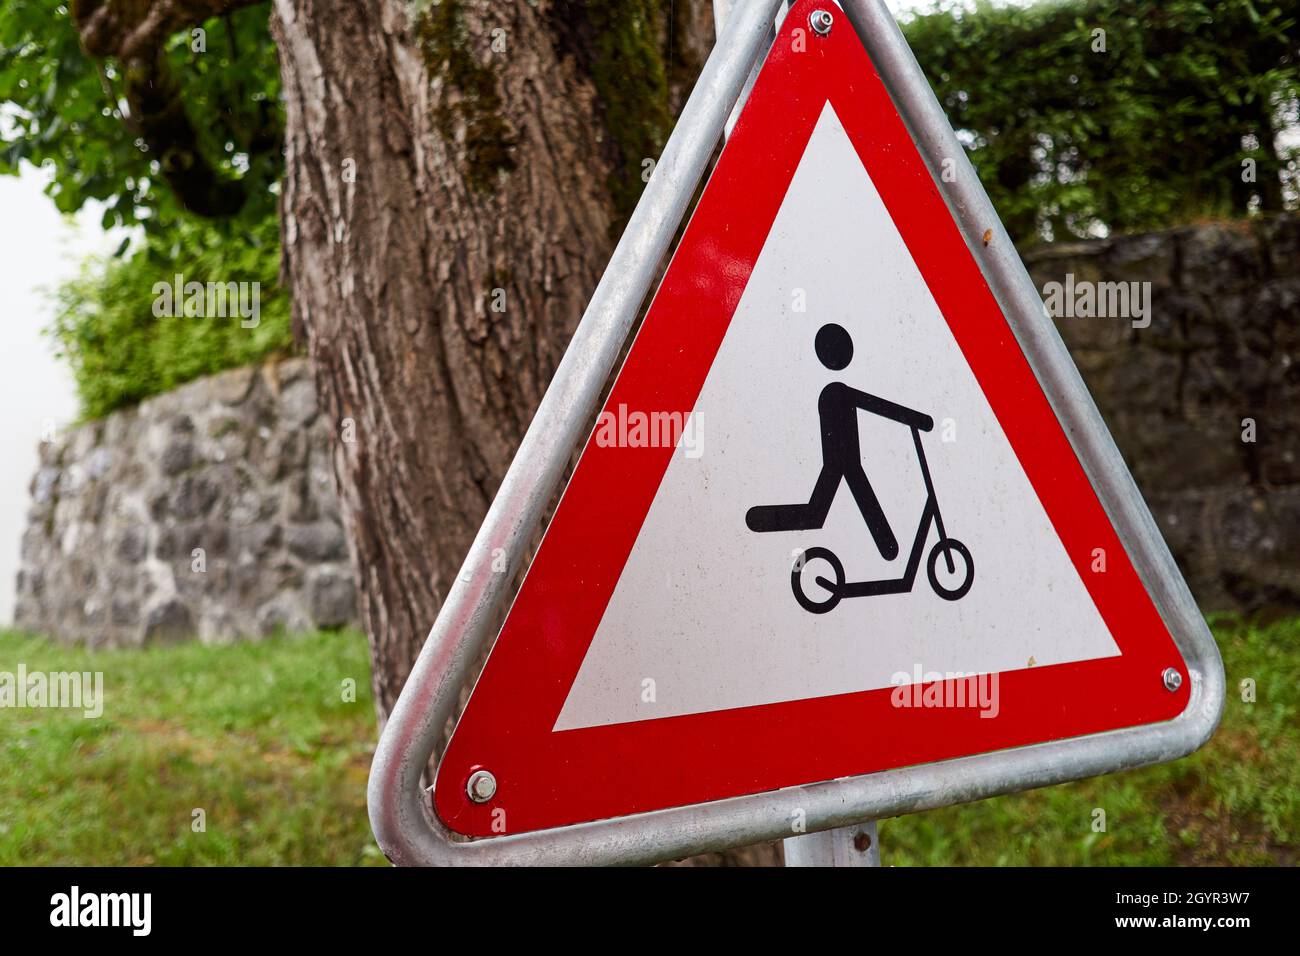 Warning traffic sign - child on scooter alert Stock Photo